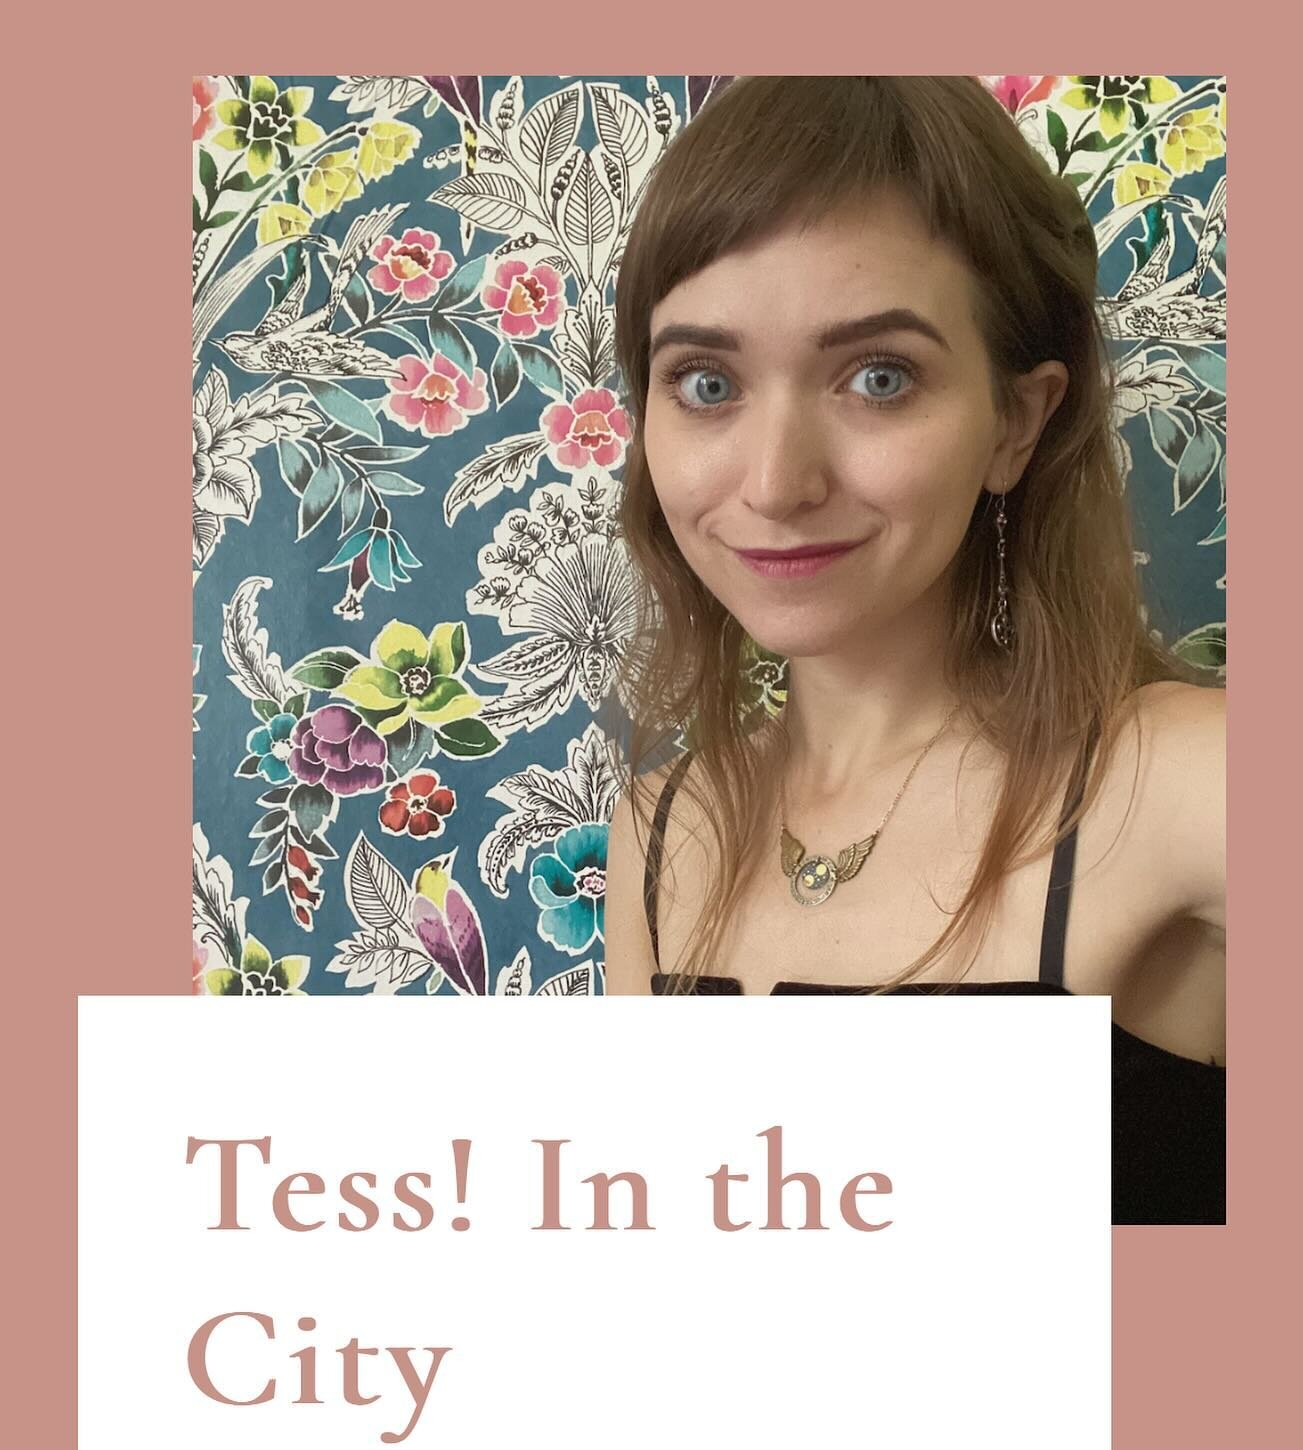 Poetry from Tess Congo to start the show!  Get there early on Saturday for some inspiring spoken word from an exciting Charlotte poet. Tess will do a reading in support of the BCMC bill at SOCO Gallery. See below for a description of @tess_in_the_cit